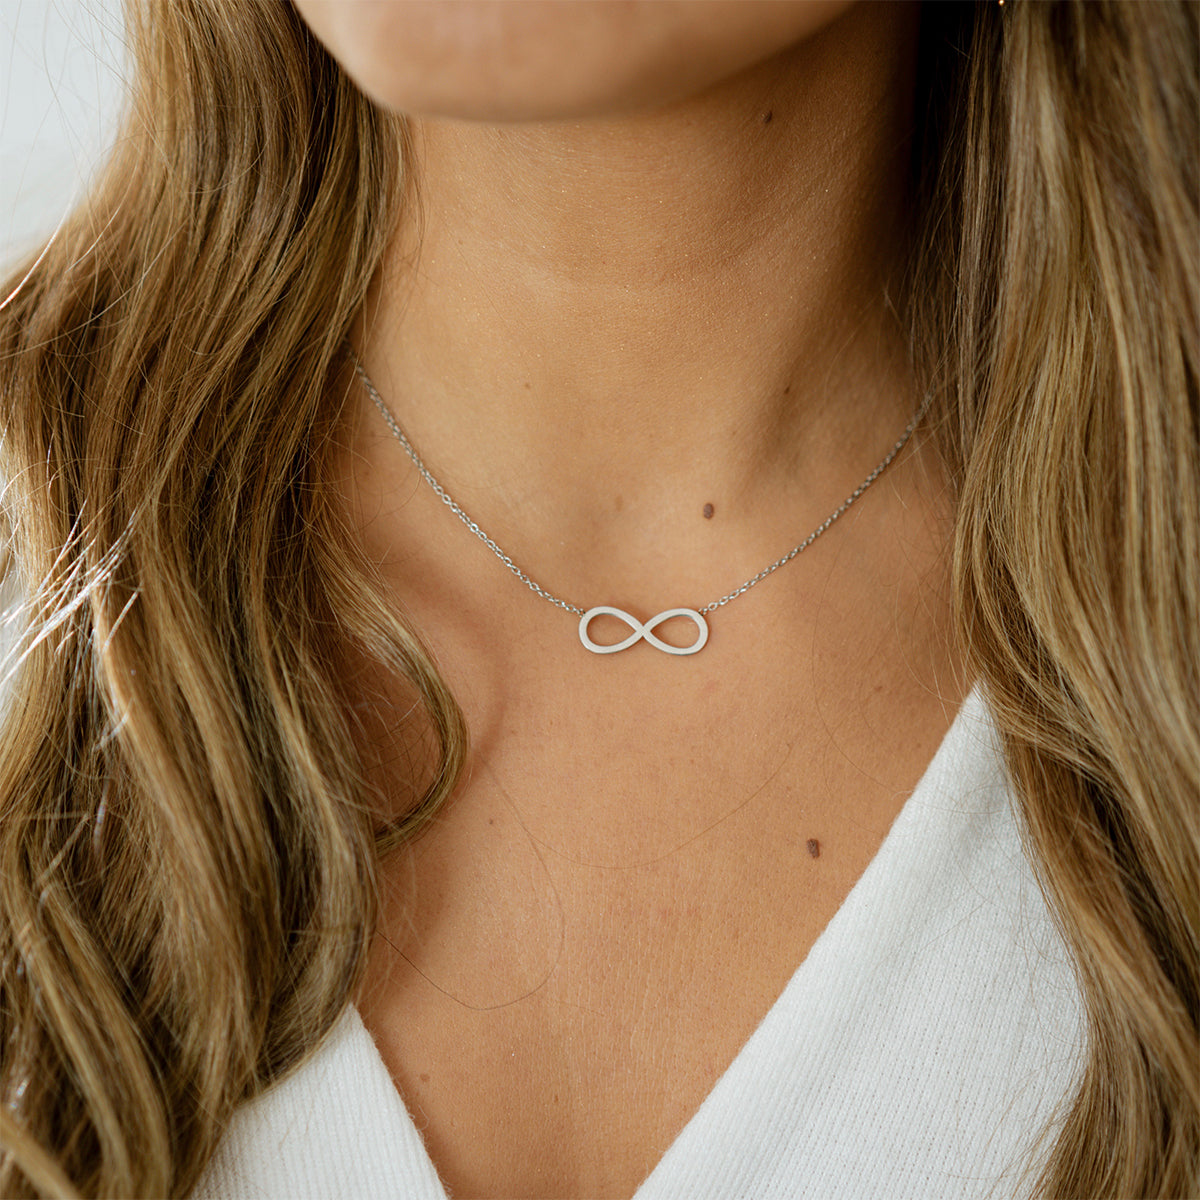 10K, 14K, 18K Solid Gold or Sterling Silver Sideways Infinity Necklace  Charm Necklace Available in Yellow, White and Rose Gold - Etsy